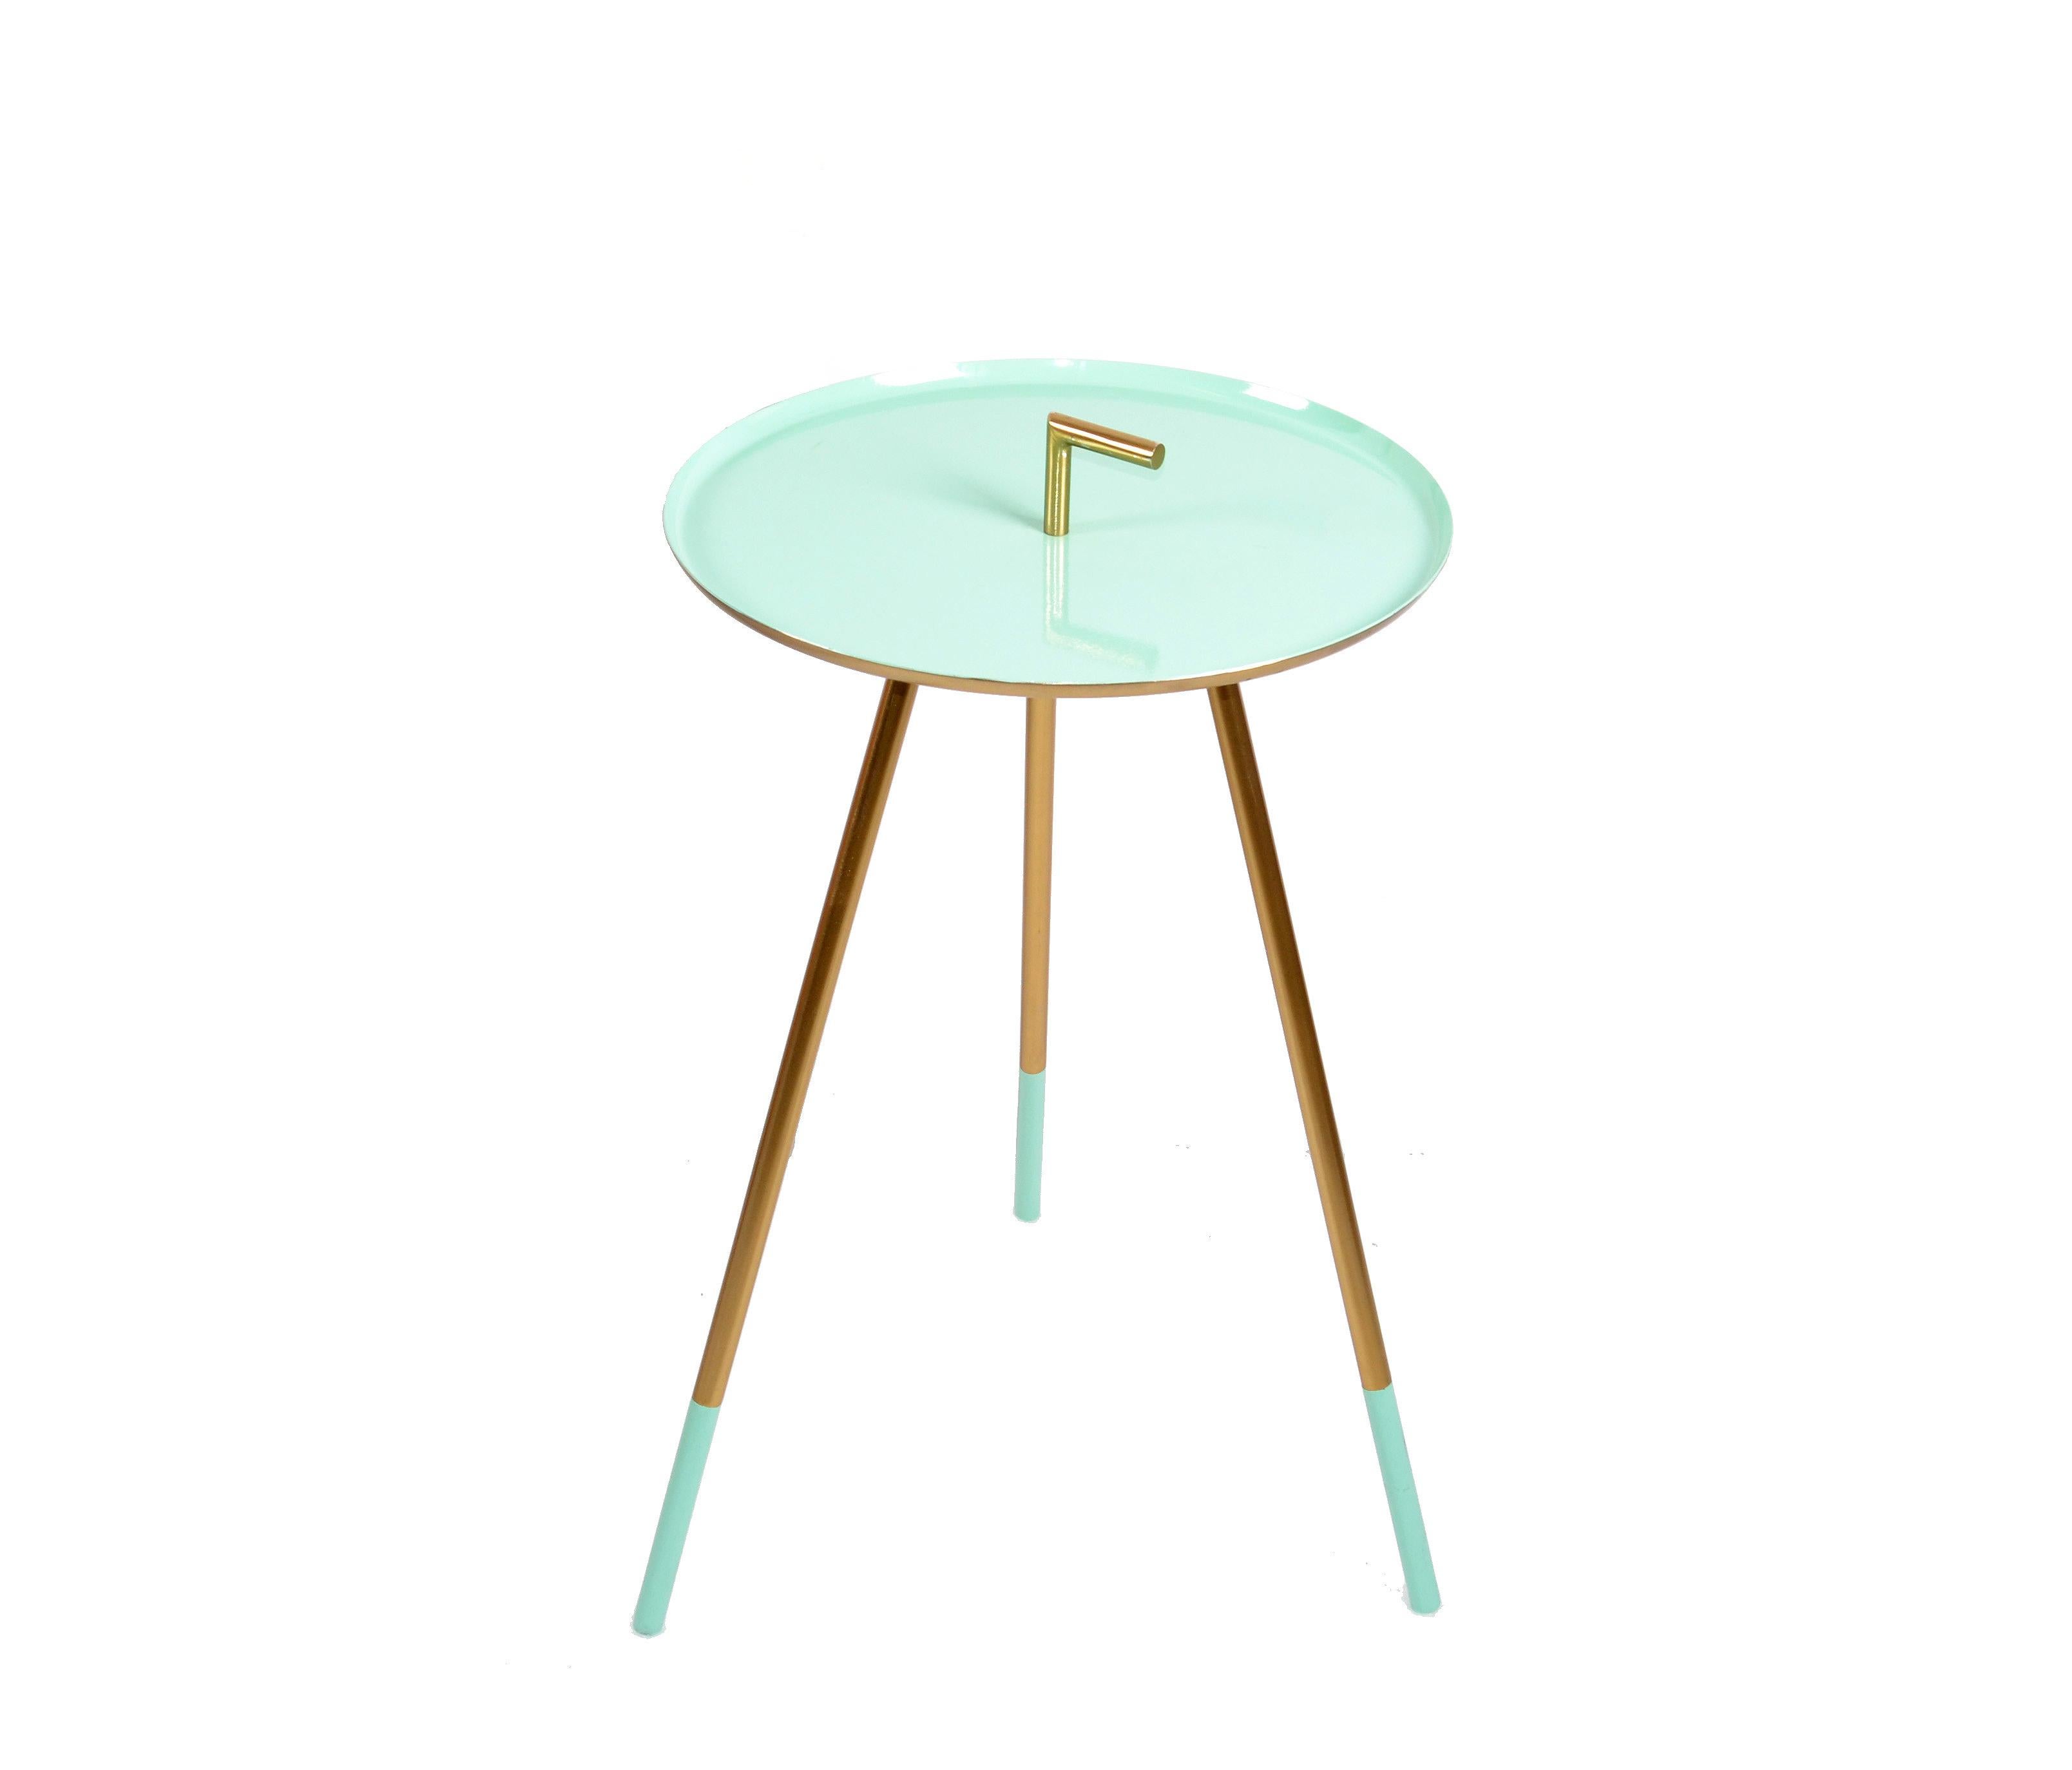 Stylish 1950s Italian side or end table on three legs in polished brass.
The top has a finish in turquoise enamel.
Timeless Mid-Century Modern Design for daily practical use.
  